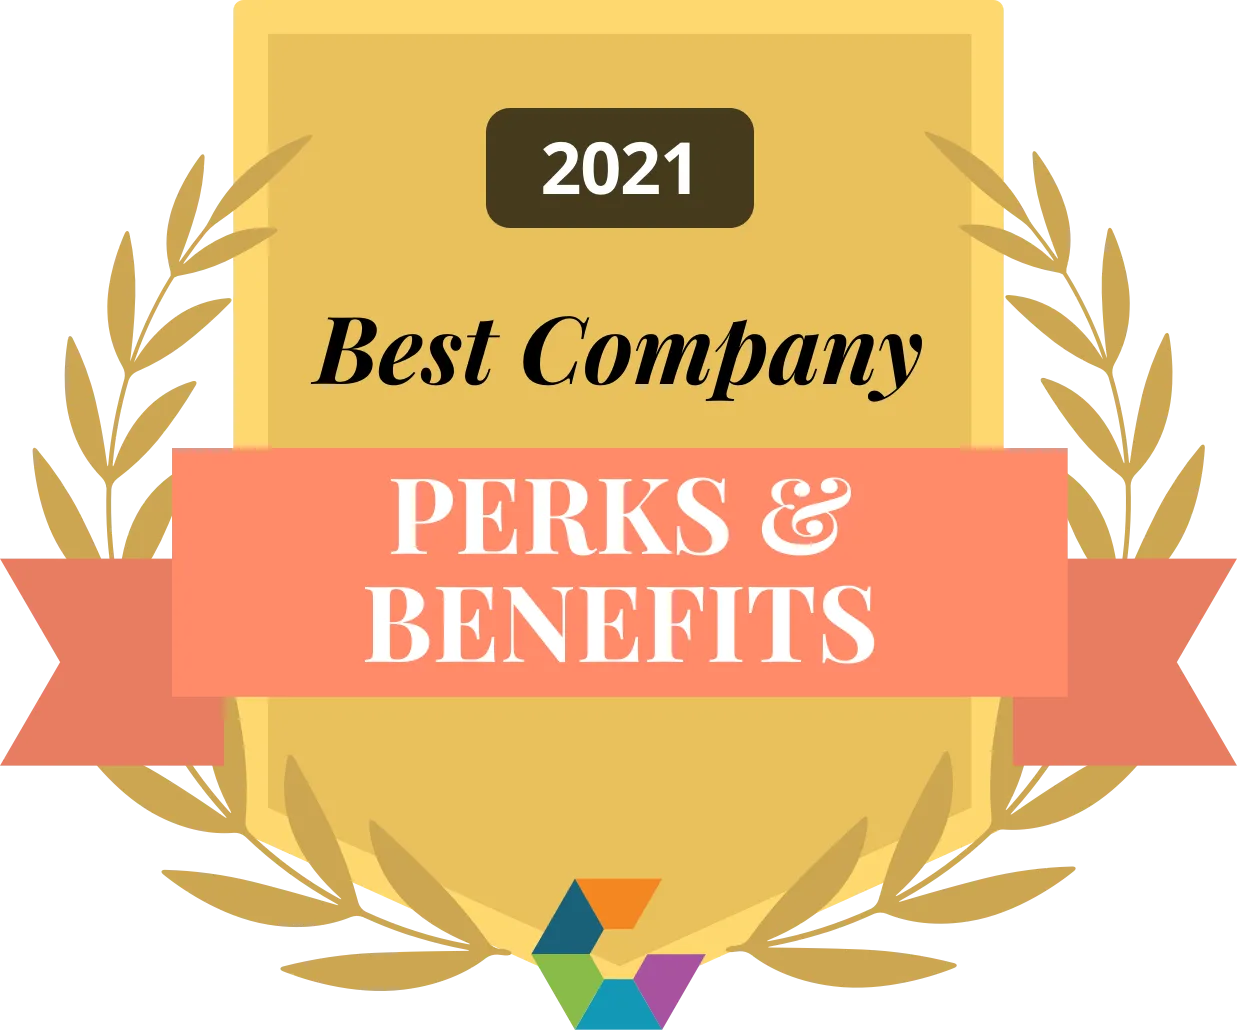 Comparably Best Perks & Benefits 2021